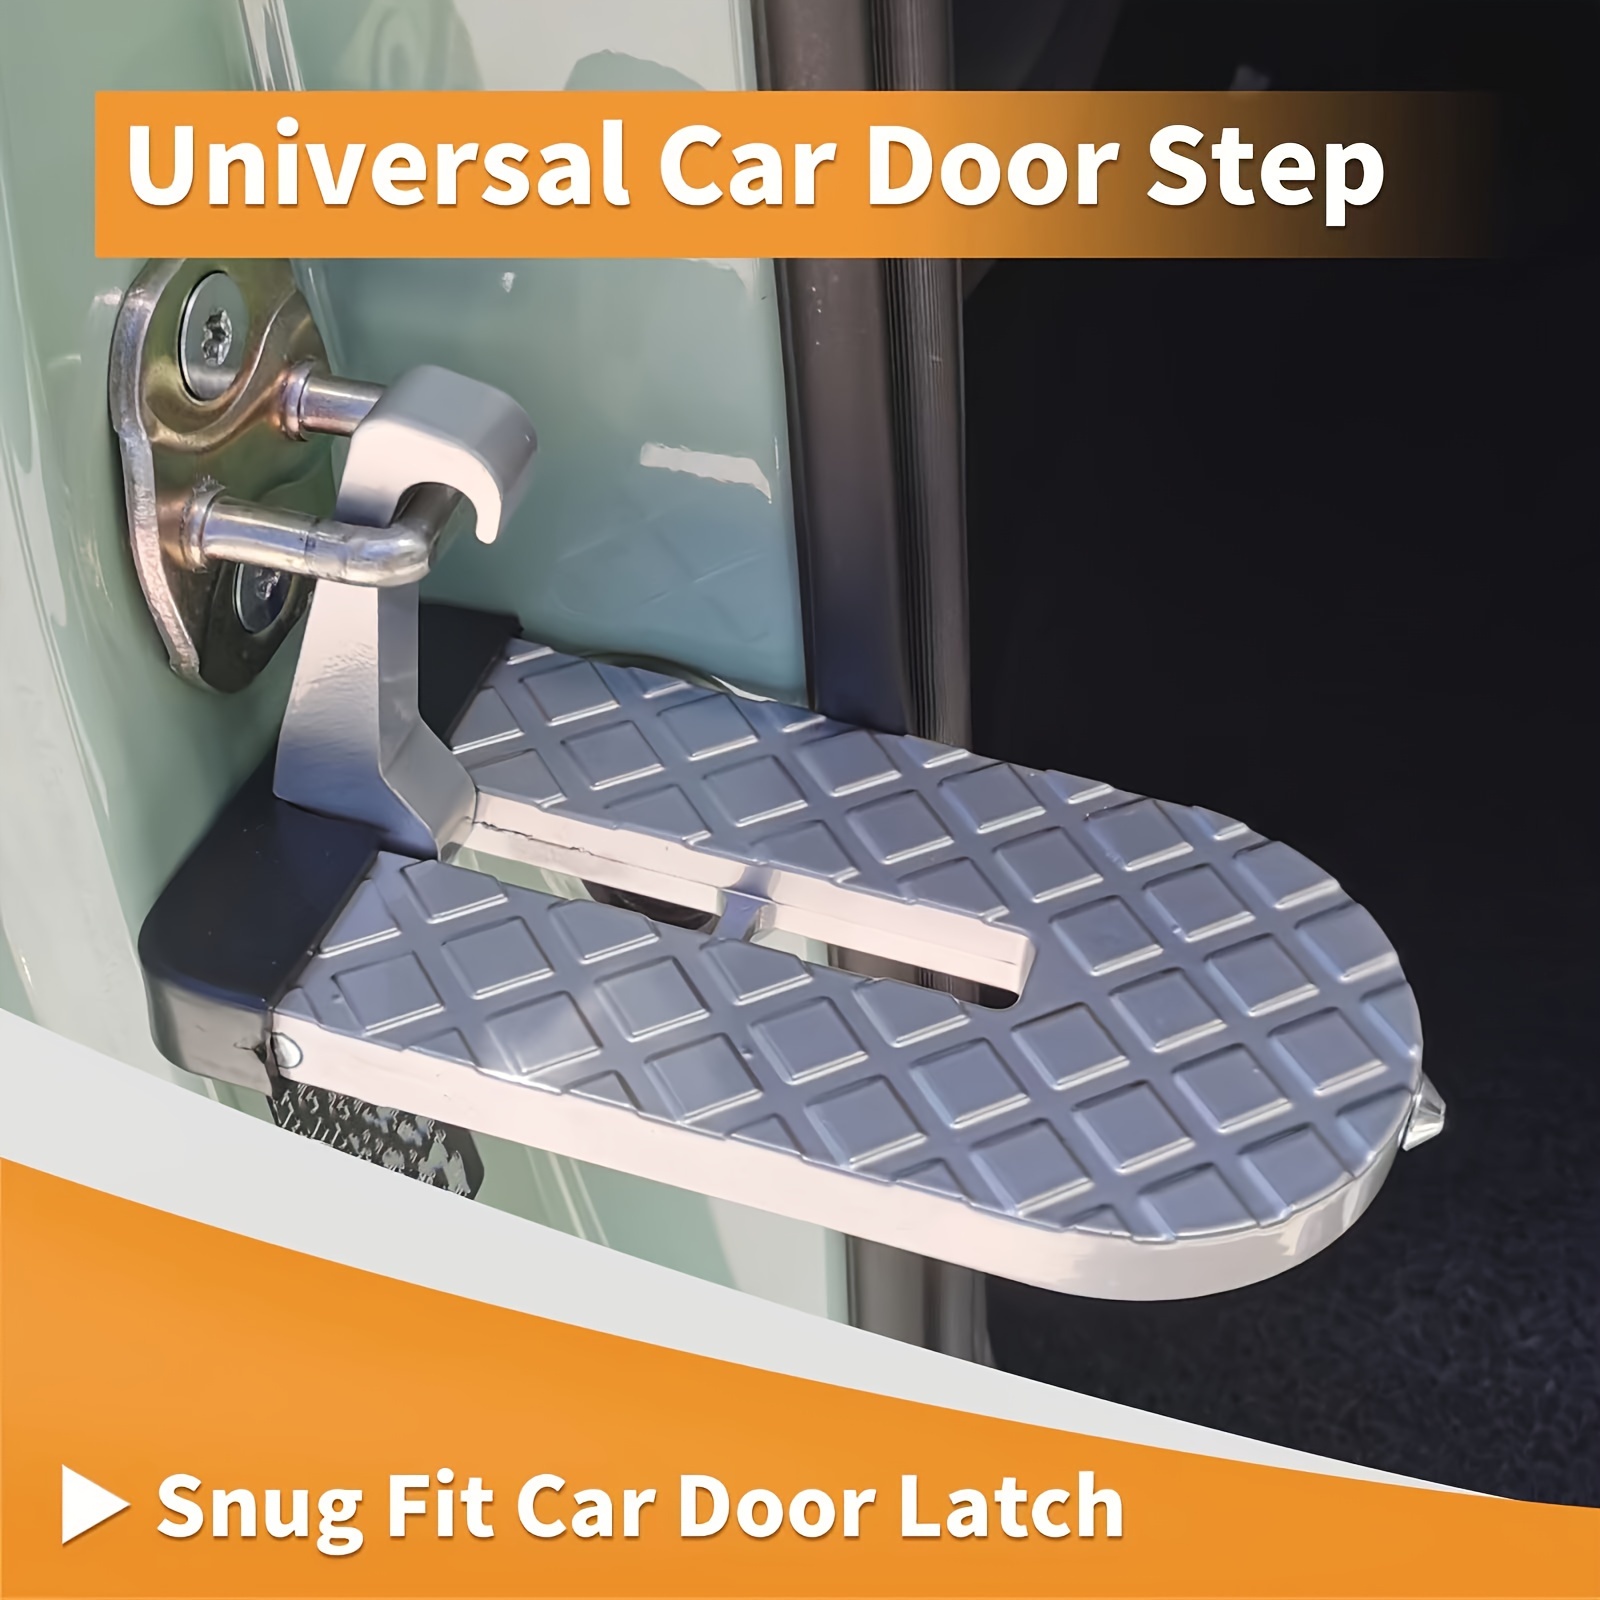 

Universal Car Door Step: Foldable Roof Rack, Glass Breaker & Safety Hammer For Easy Roof Access - Fits Most Cars, Suvs & Trucks